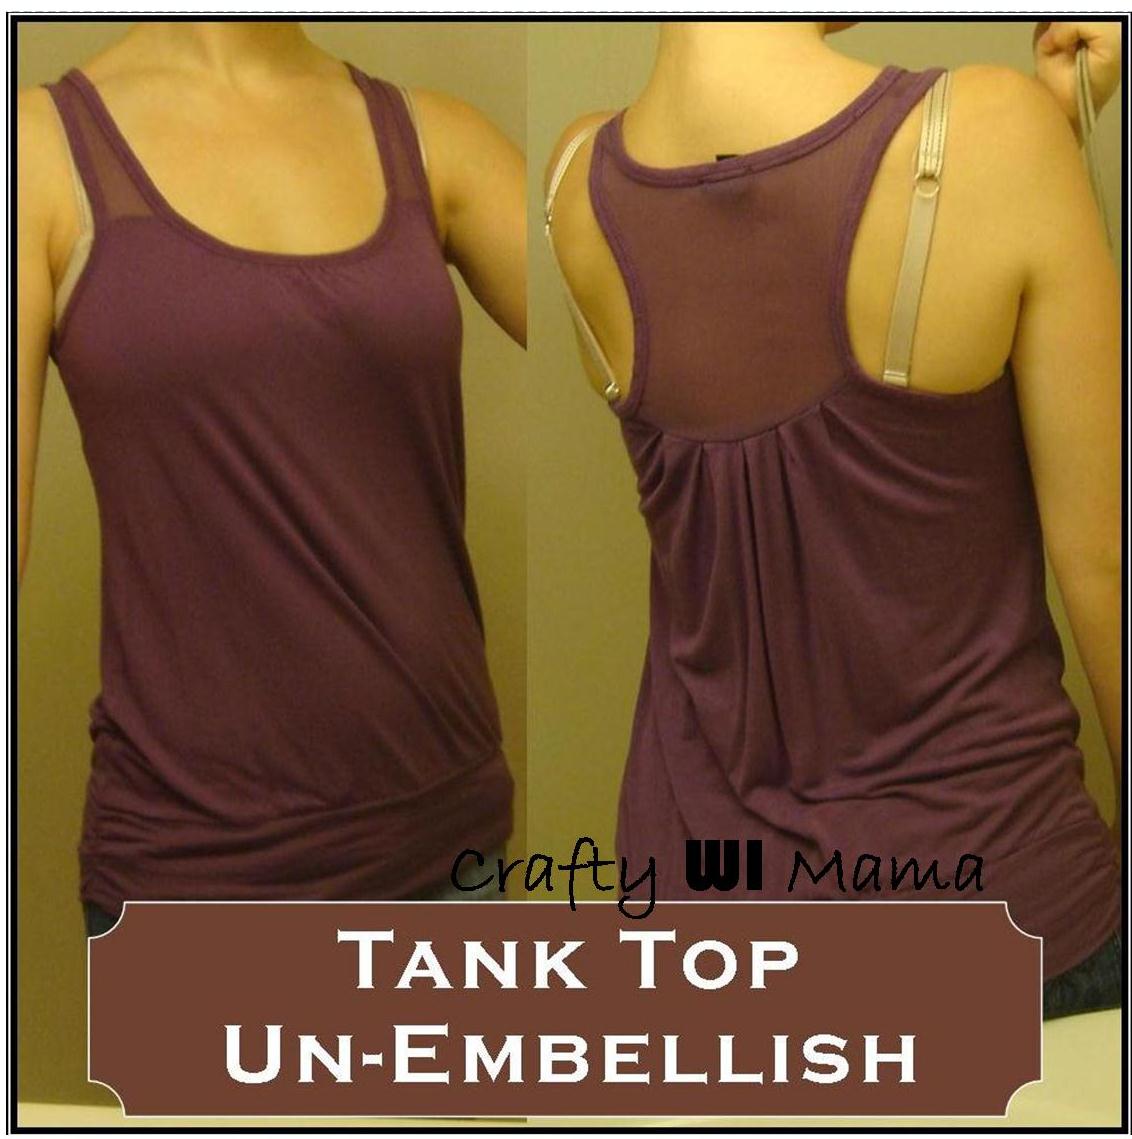 Crafty WI Mama: Un-Cycle? Tank Top Refashion by Removing Embellishments